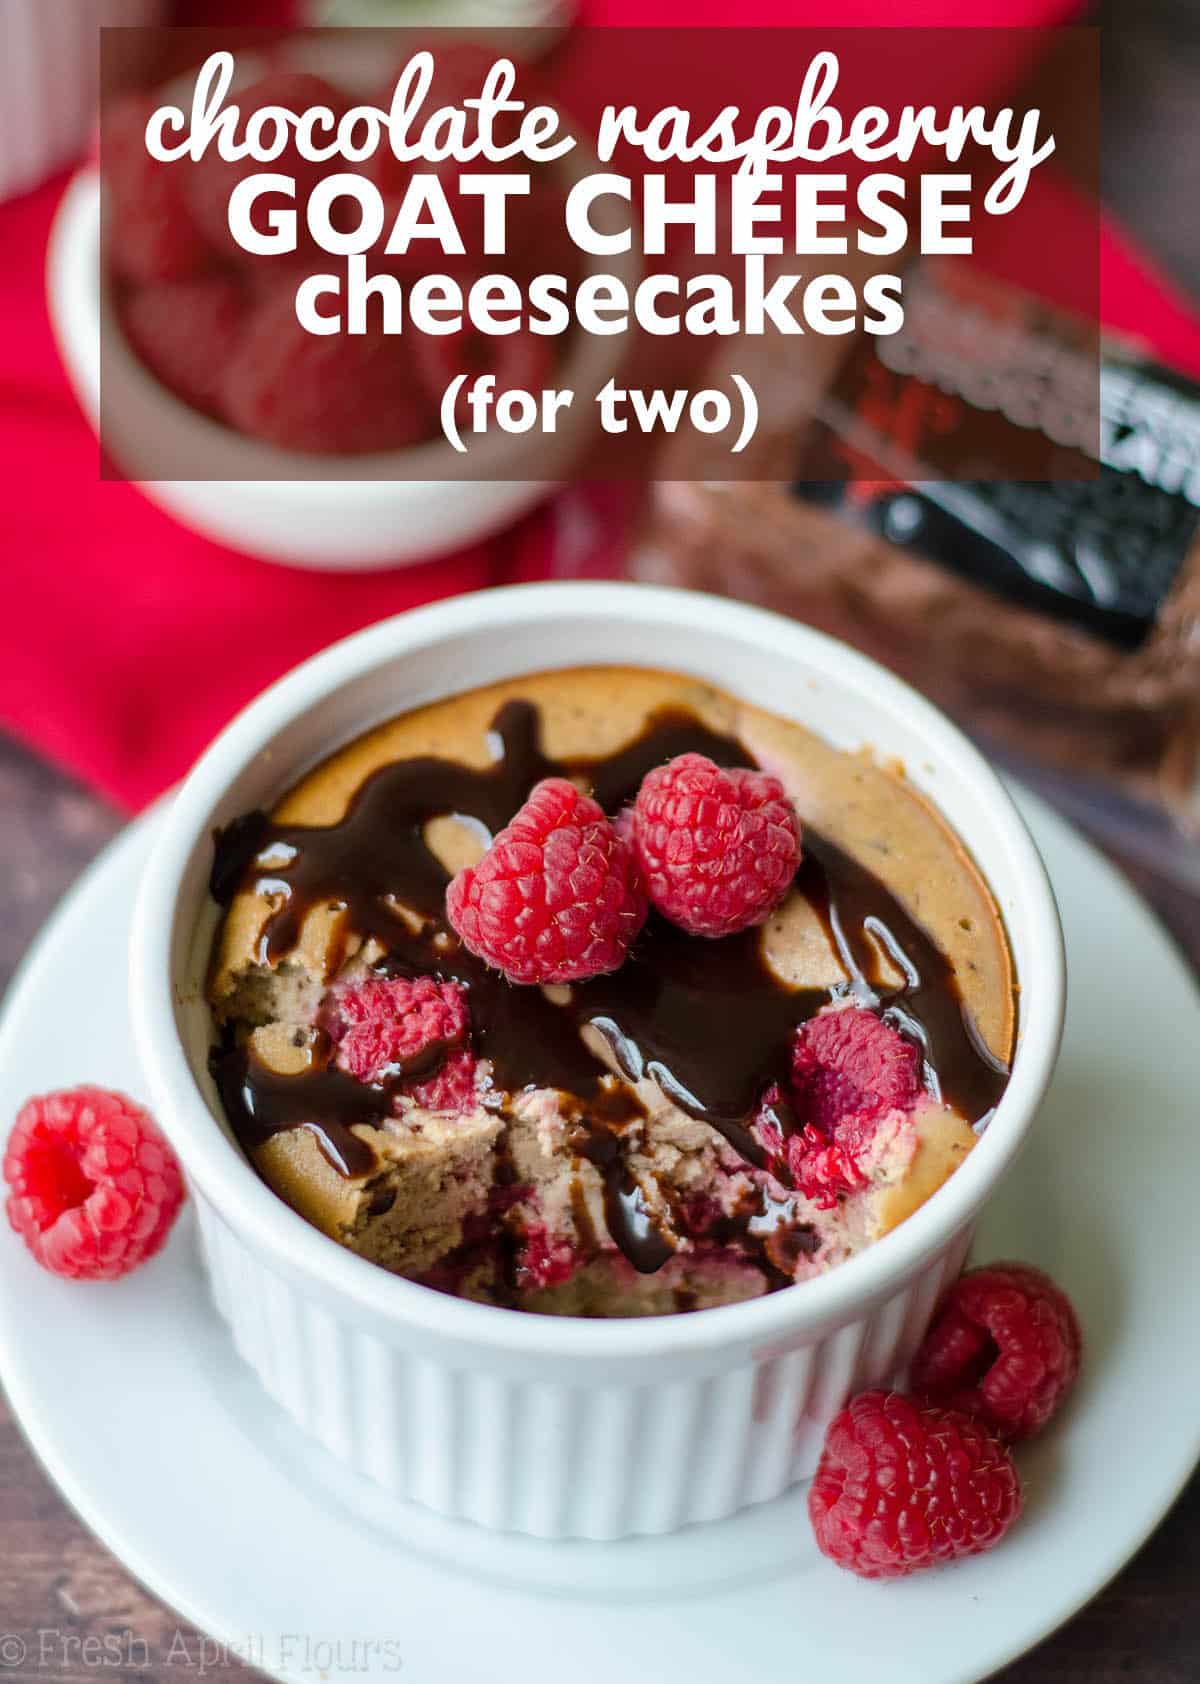 Chocolate Raspberry Goat Cheese Cheesecakes (For 2): Simple, personal sized, gluten free cheesecakes made with chocolate raspberry goat cheese and fresh raspberries. via @frshaprilflours